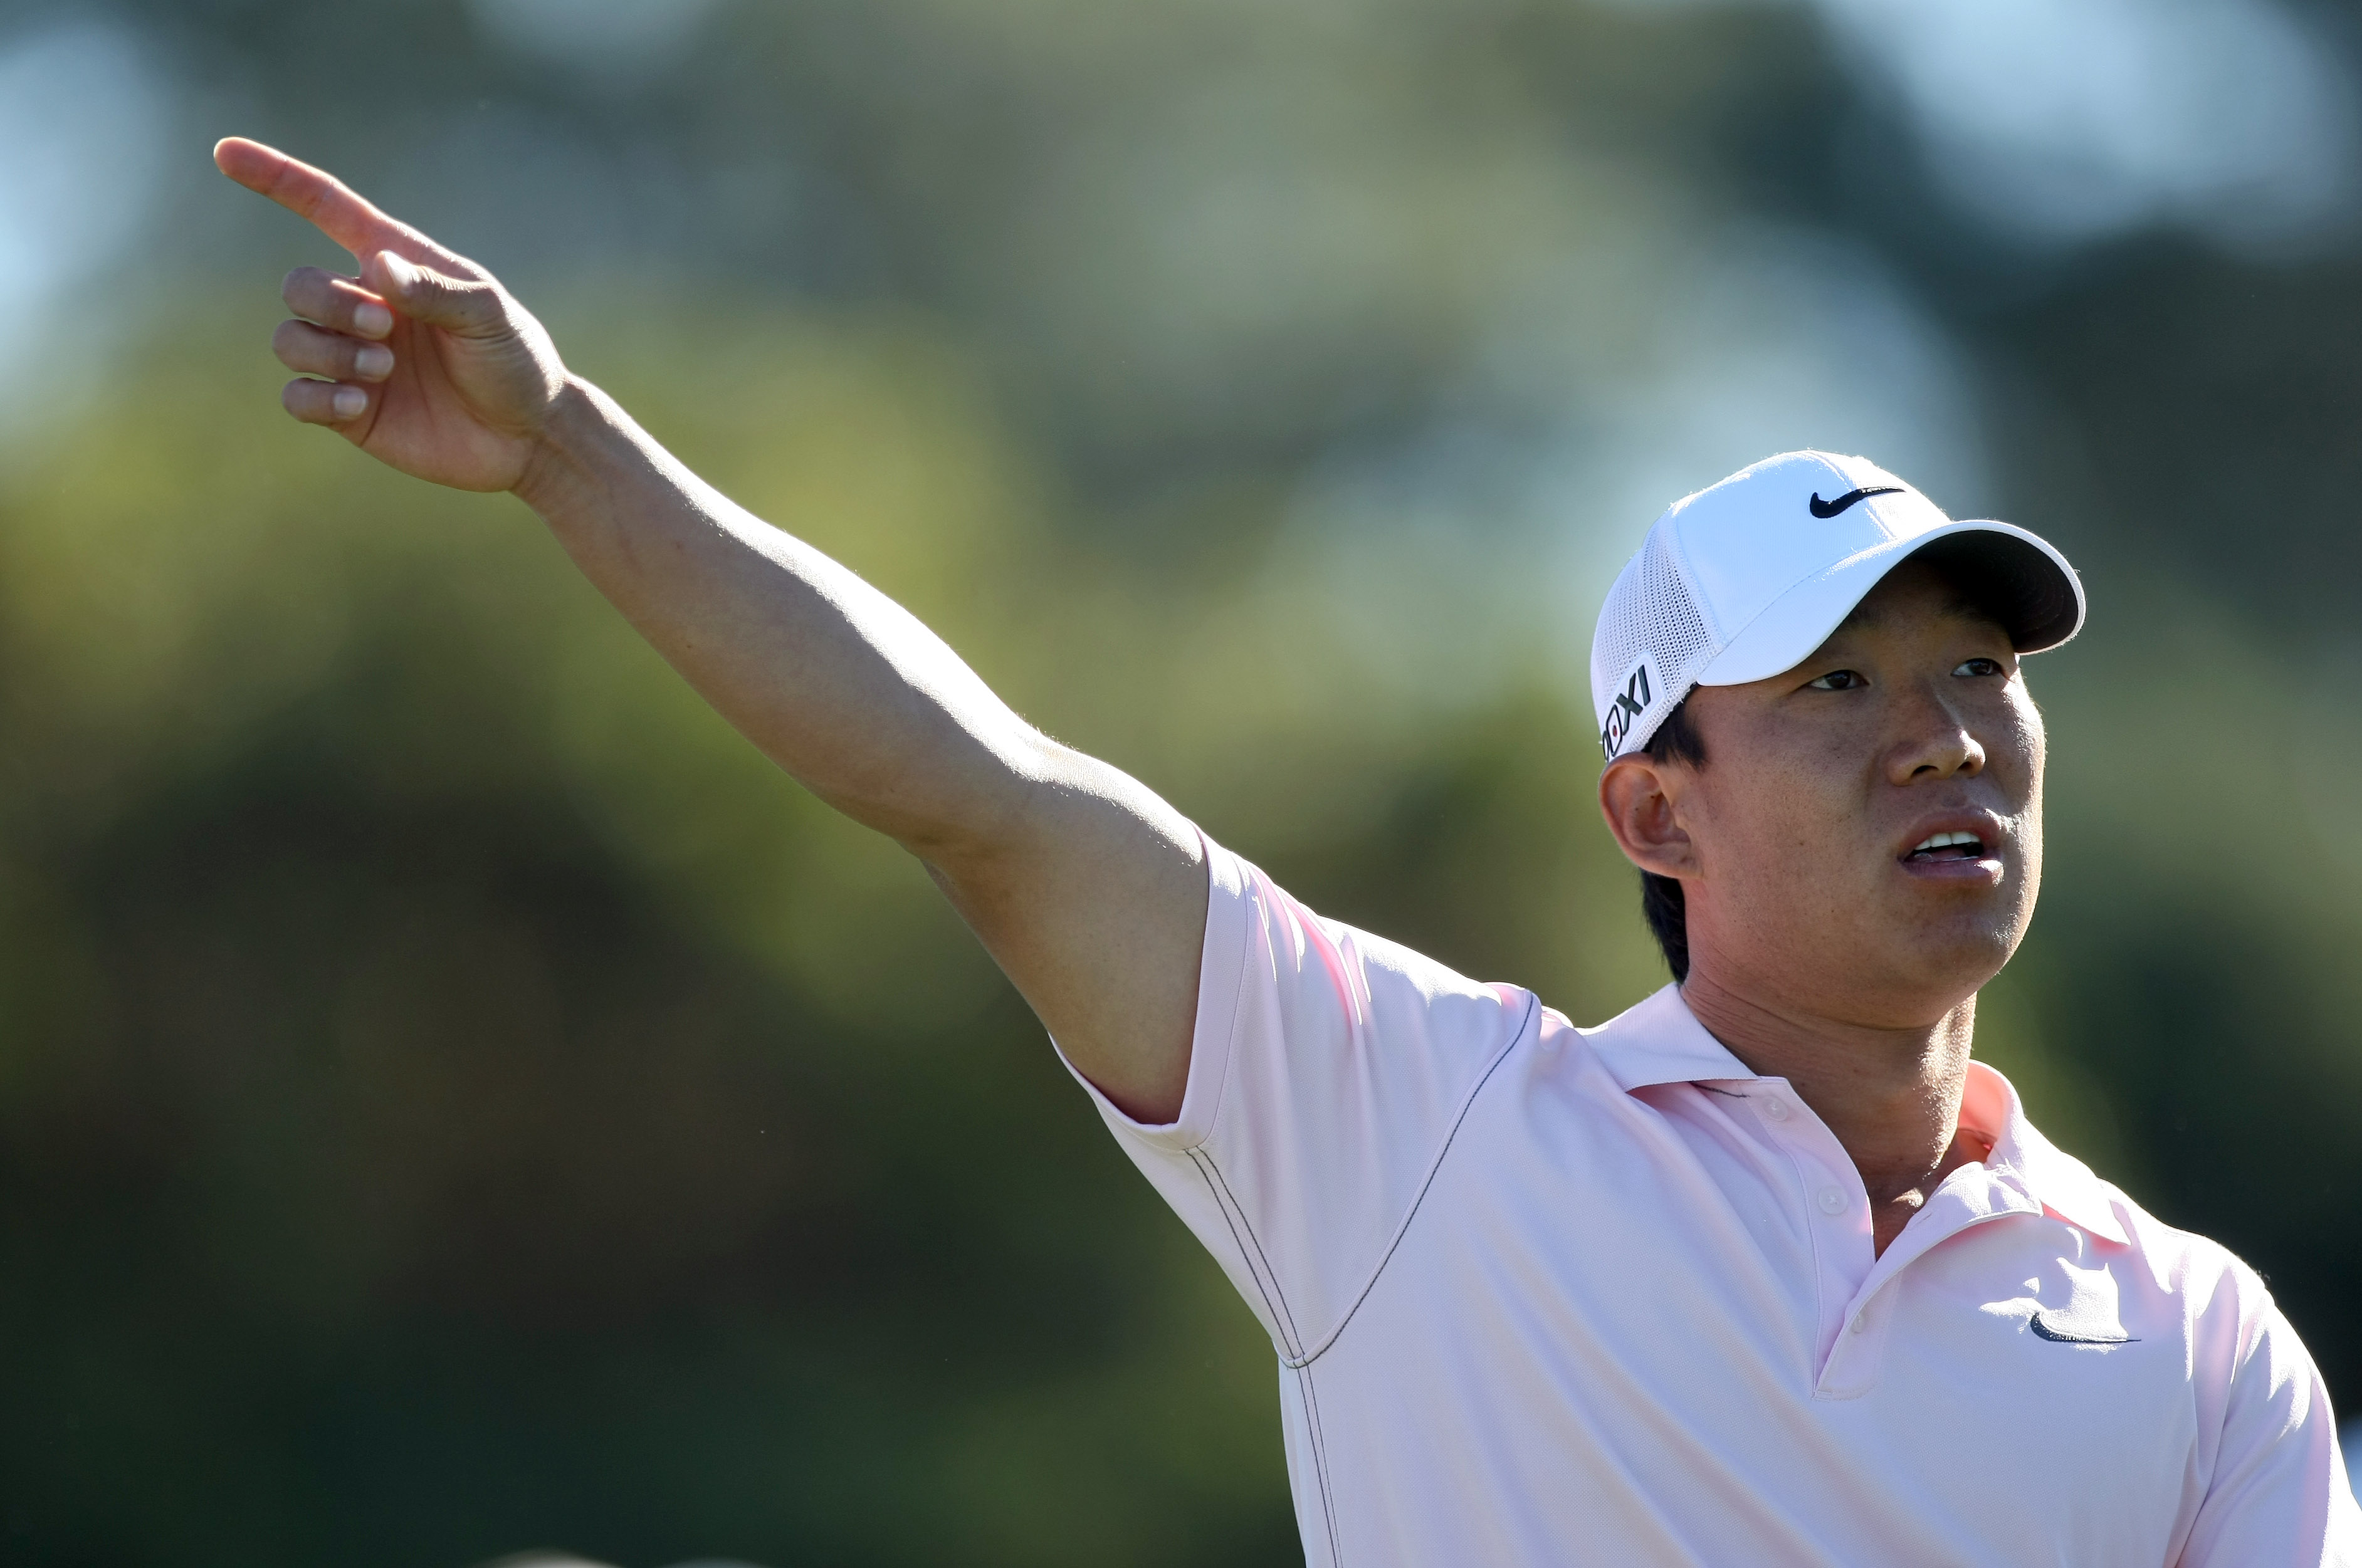 LA JOLLA, CA - JANUARY 27:  Anthony Kim tees off the  during the first round of the Farmers Insurance Open at Torrey Pines on January 27, 2011 in La Jolla, California. (Photo by Donald Miralle/Getty Images)